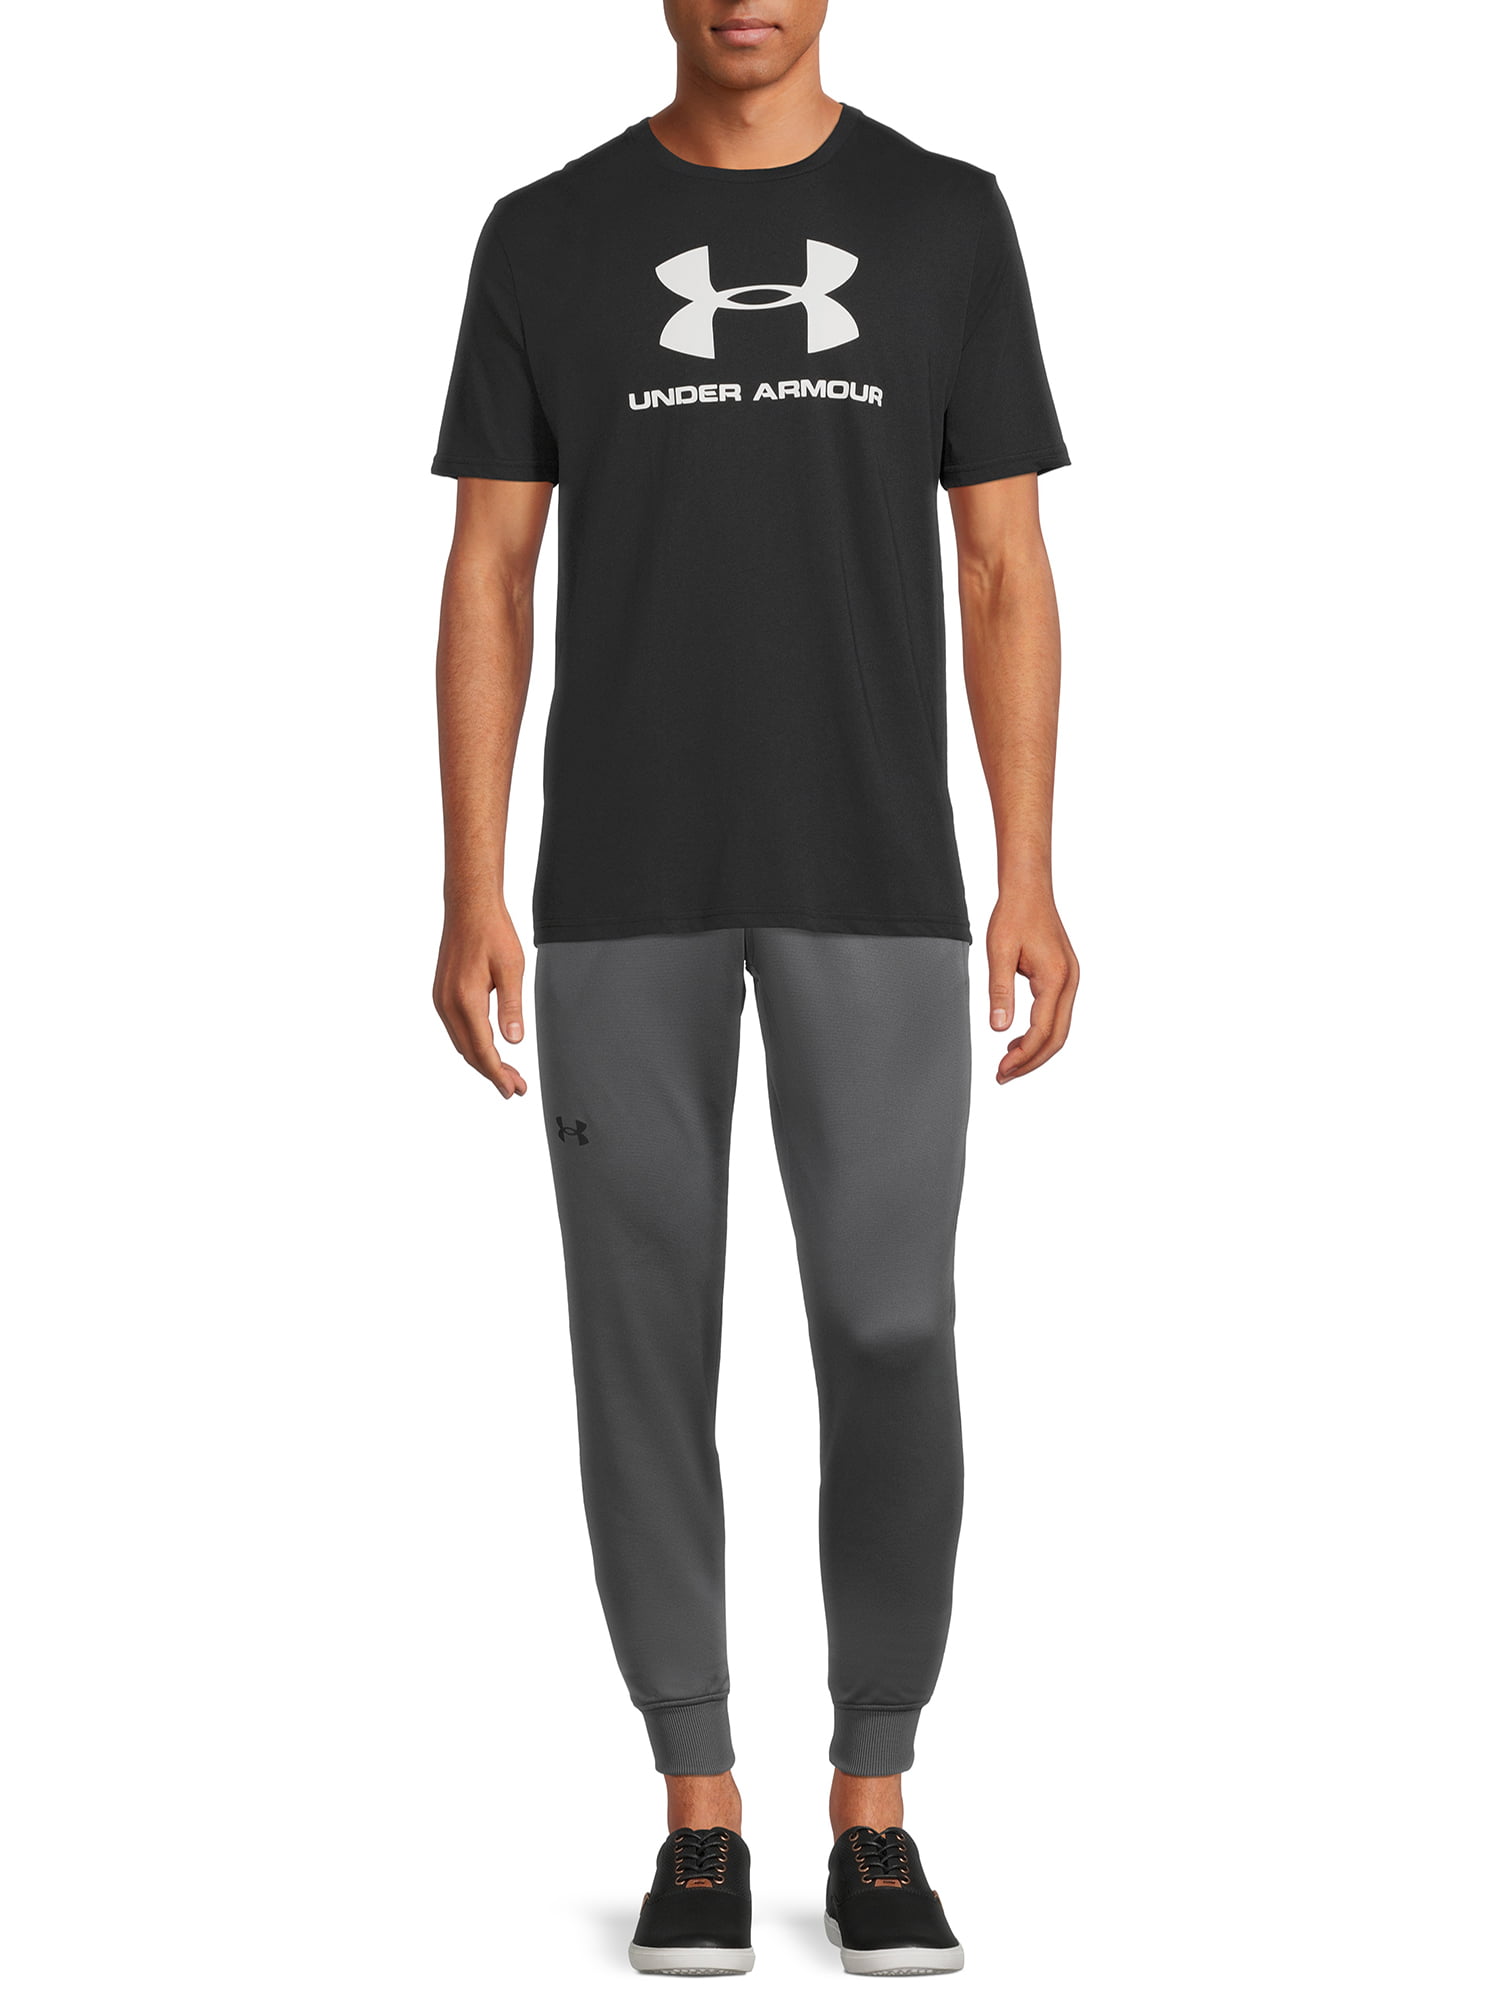 Under Armour Men\'s and Big Men\'s UA Sportstyle Logo T-Shirt with Short  Sleeves, Sizes up to 2XL